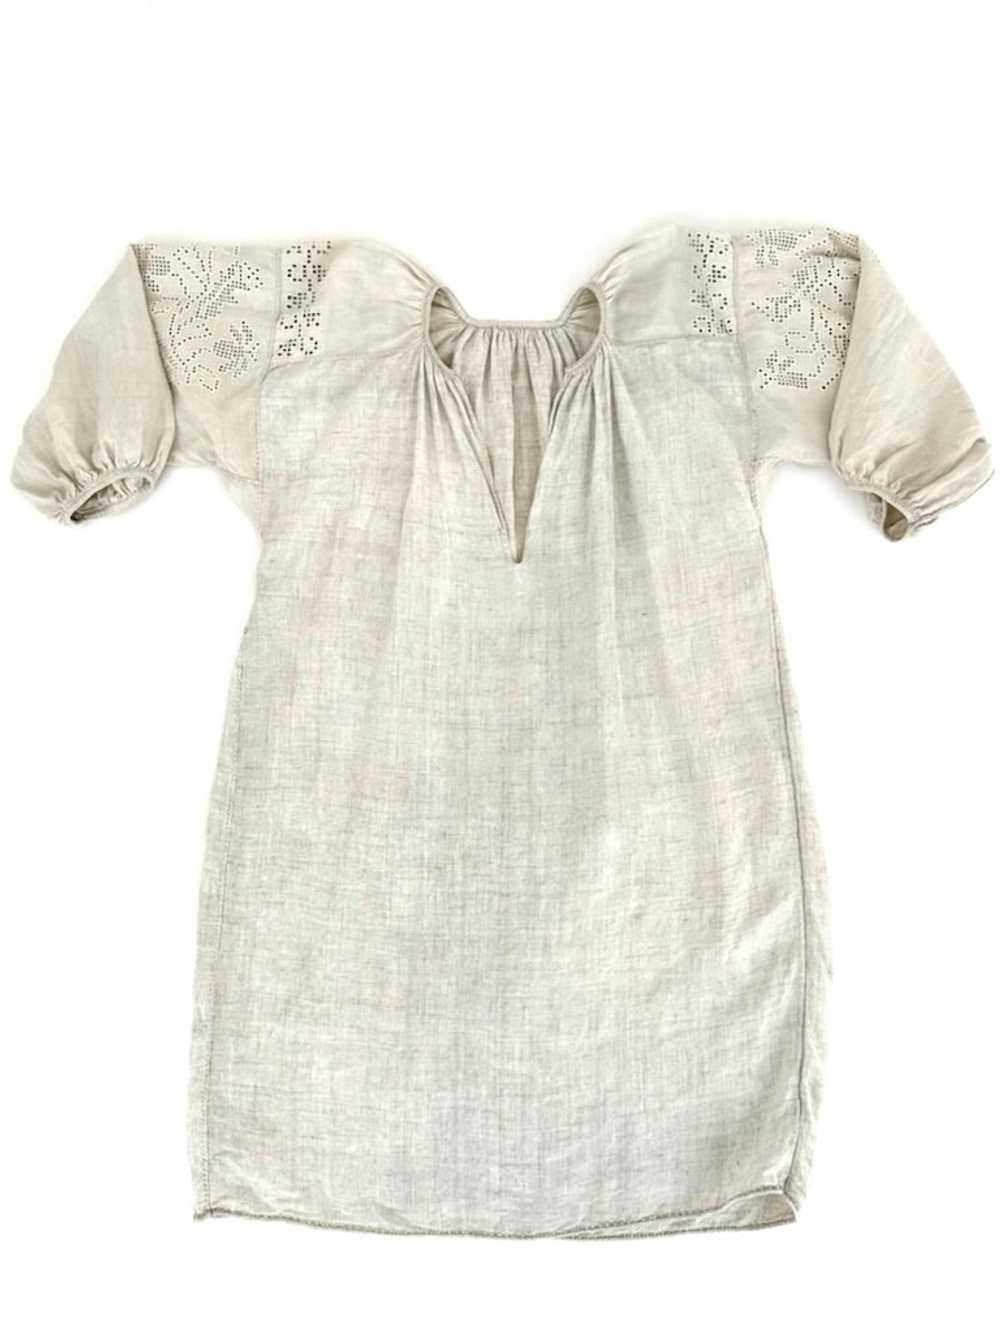 Linen Embroidered Puff Sleeve Dress - image 1